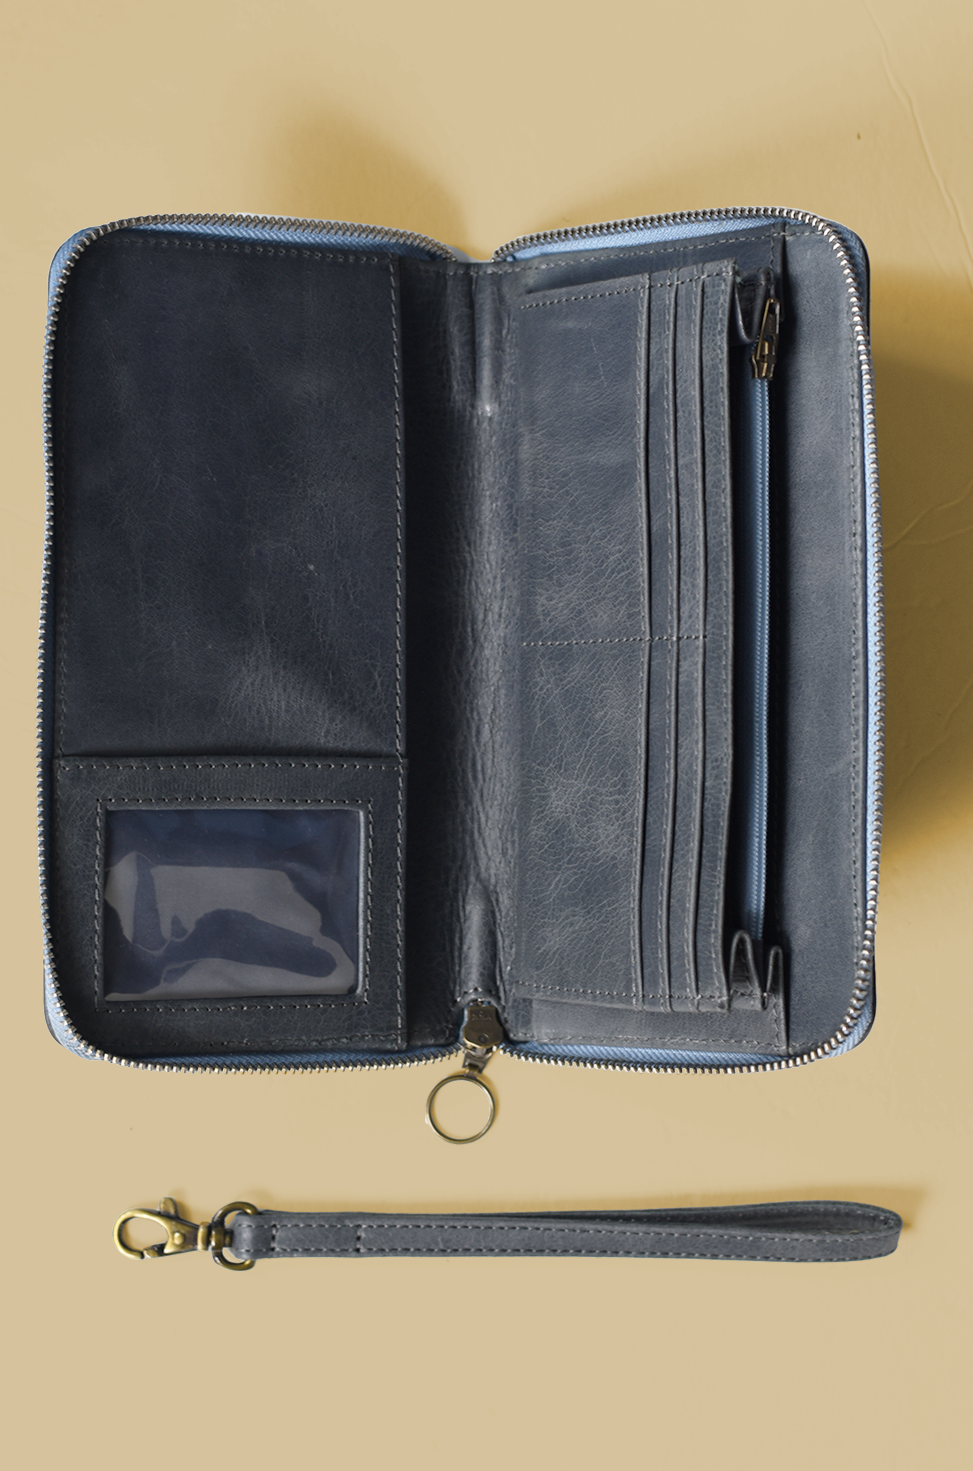 Ethical fashion wallet brand in Austin